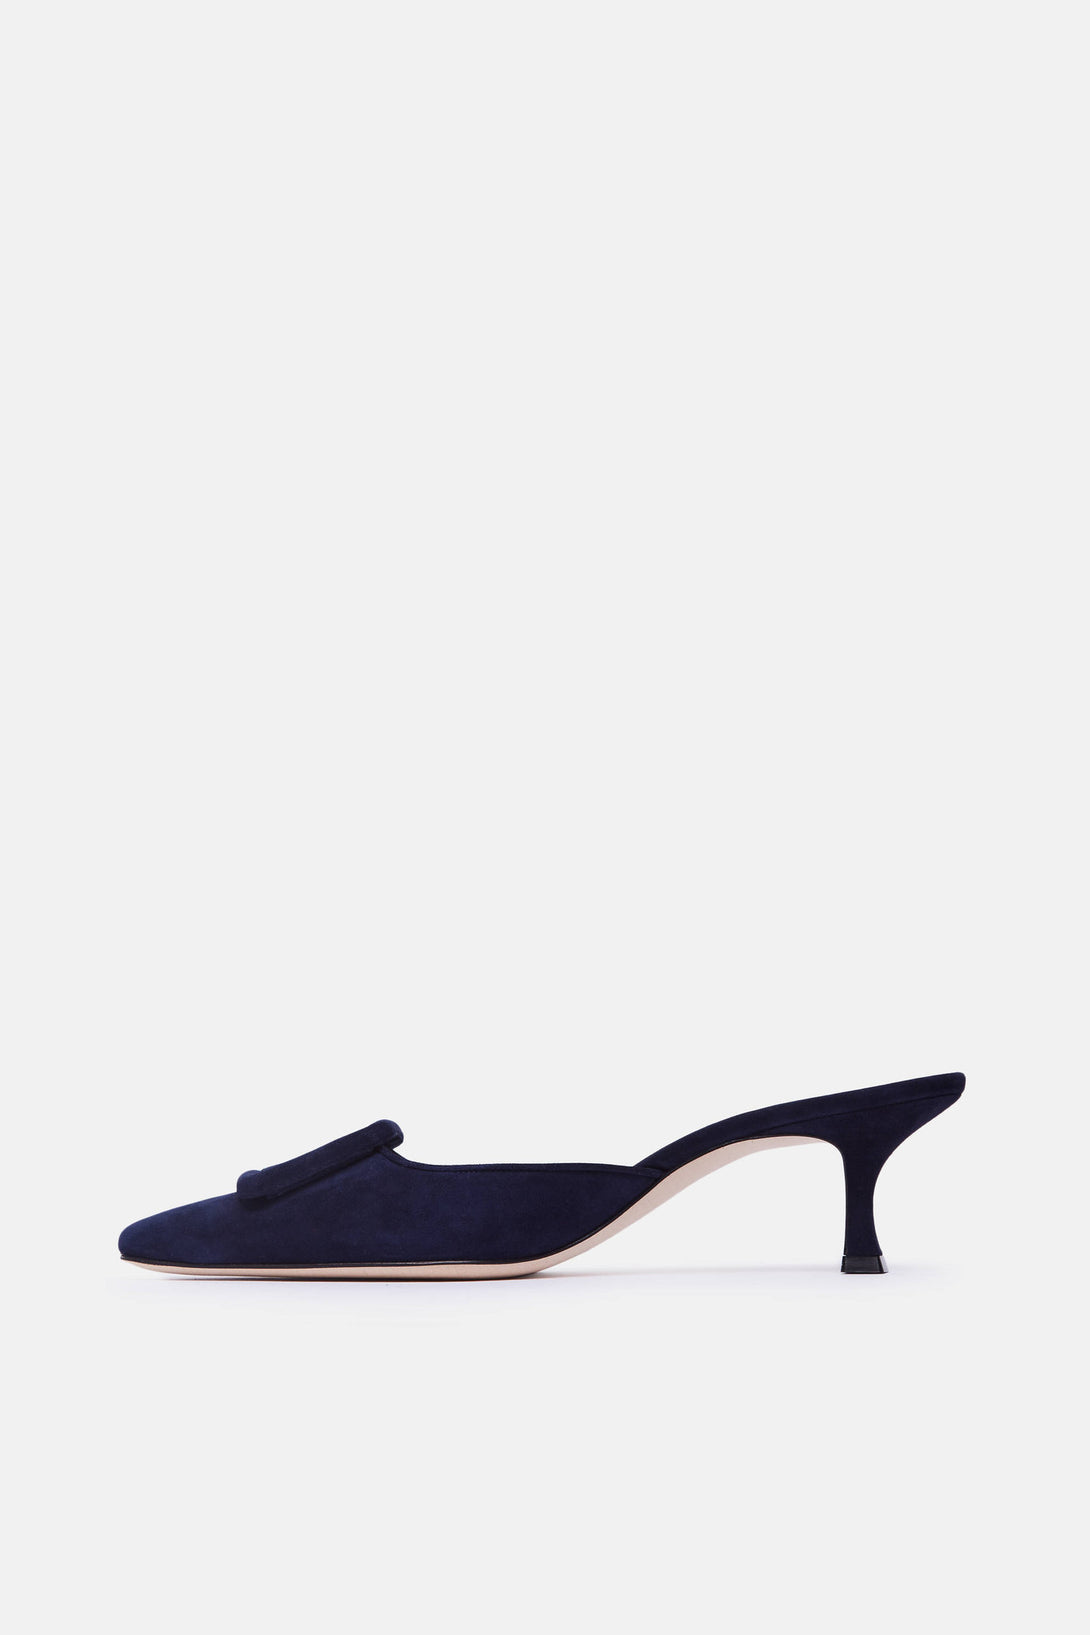 Maysale Mule - Navy Suede – The Line